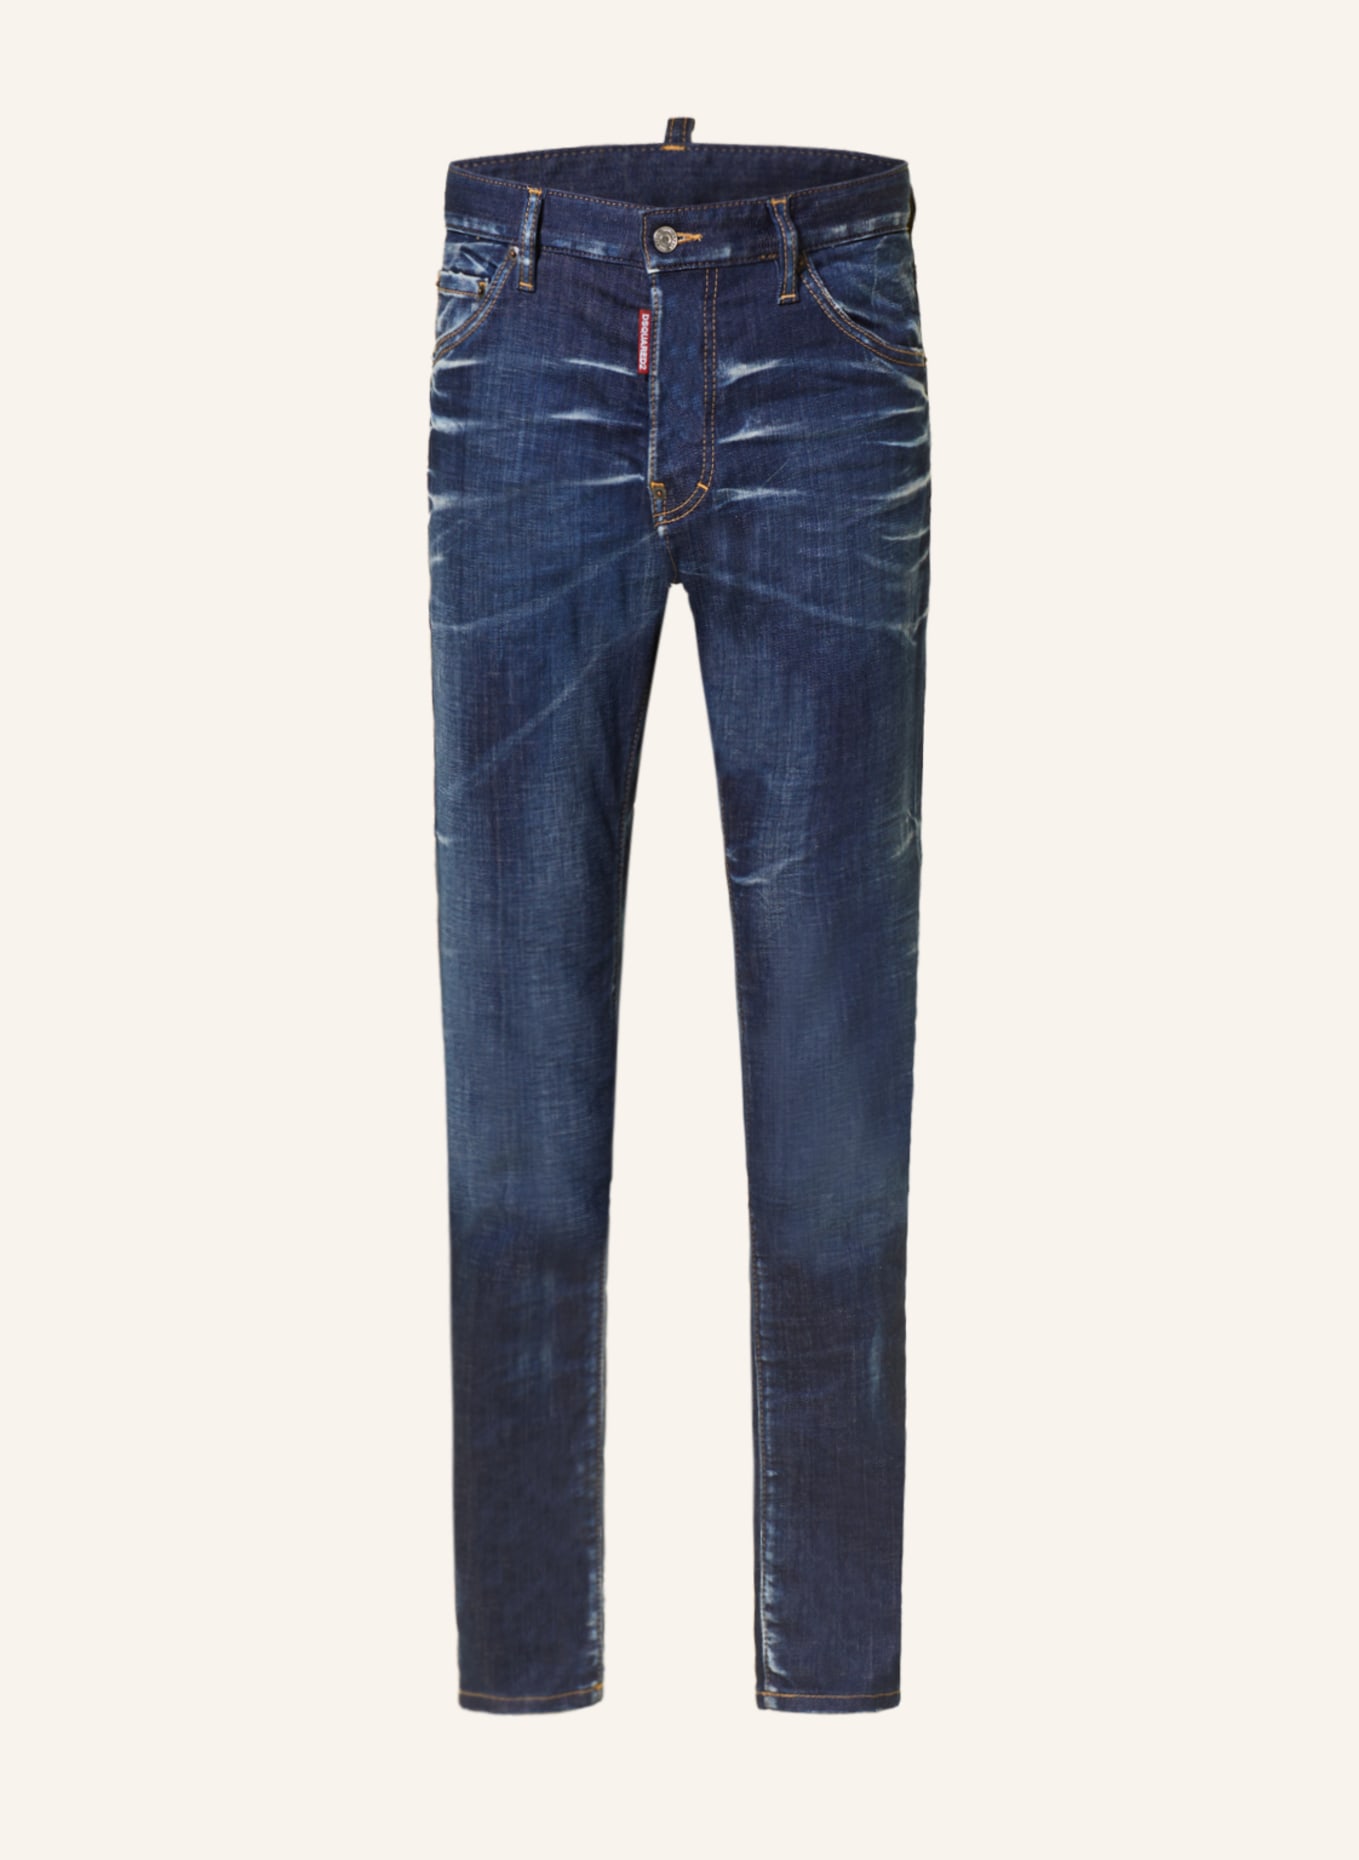 DSQUARED2 Jeans COOL GUY Extra Slim Fit, Farbe: 470 NAVY BLUE (Bild 1)